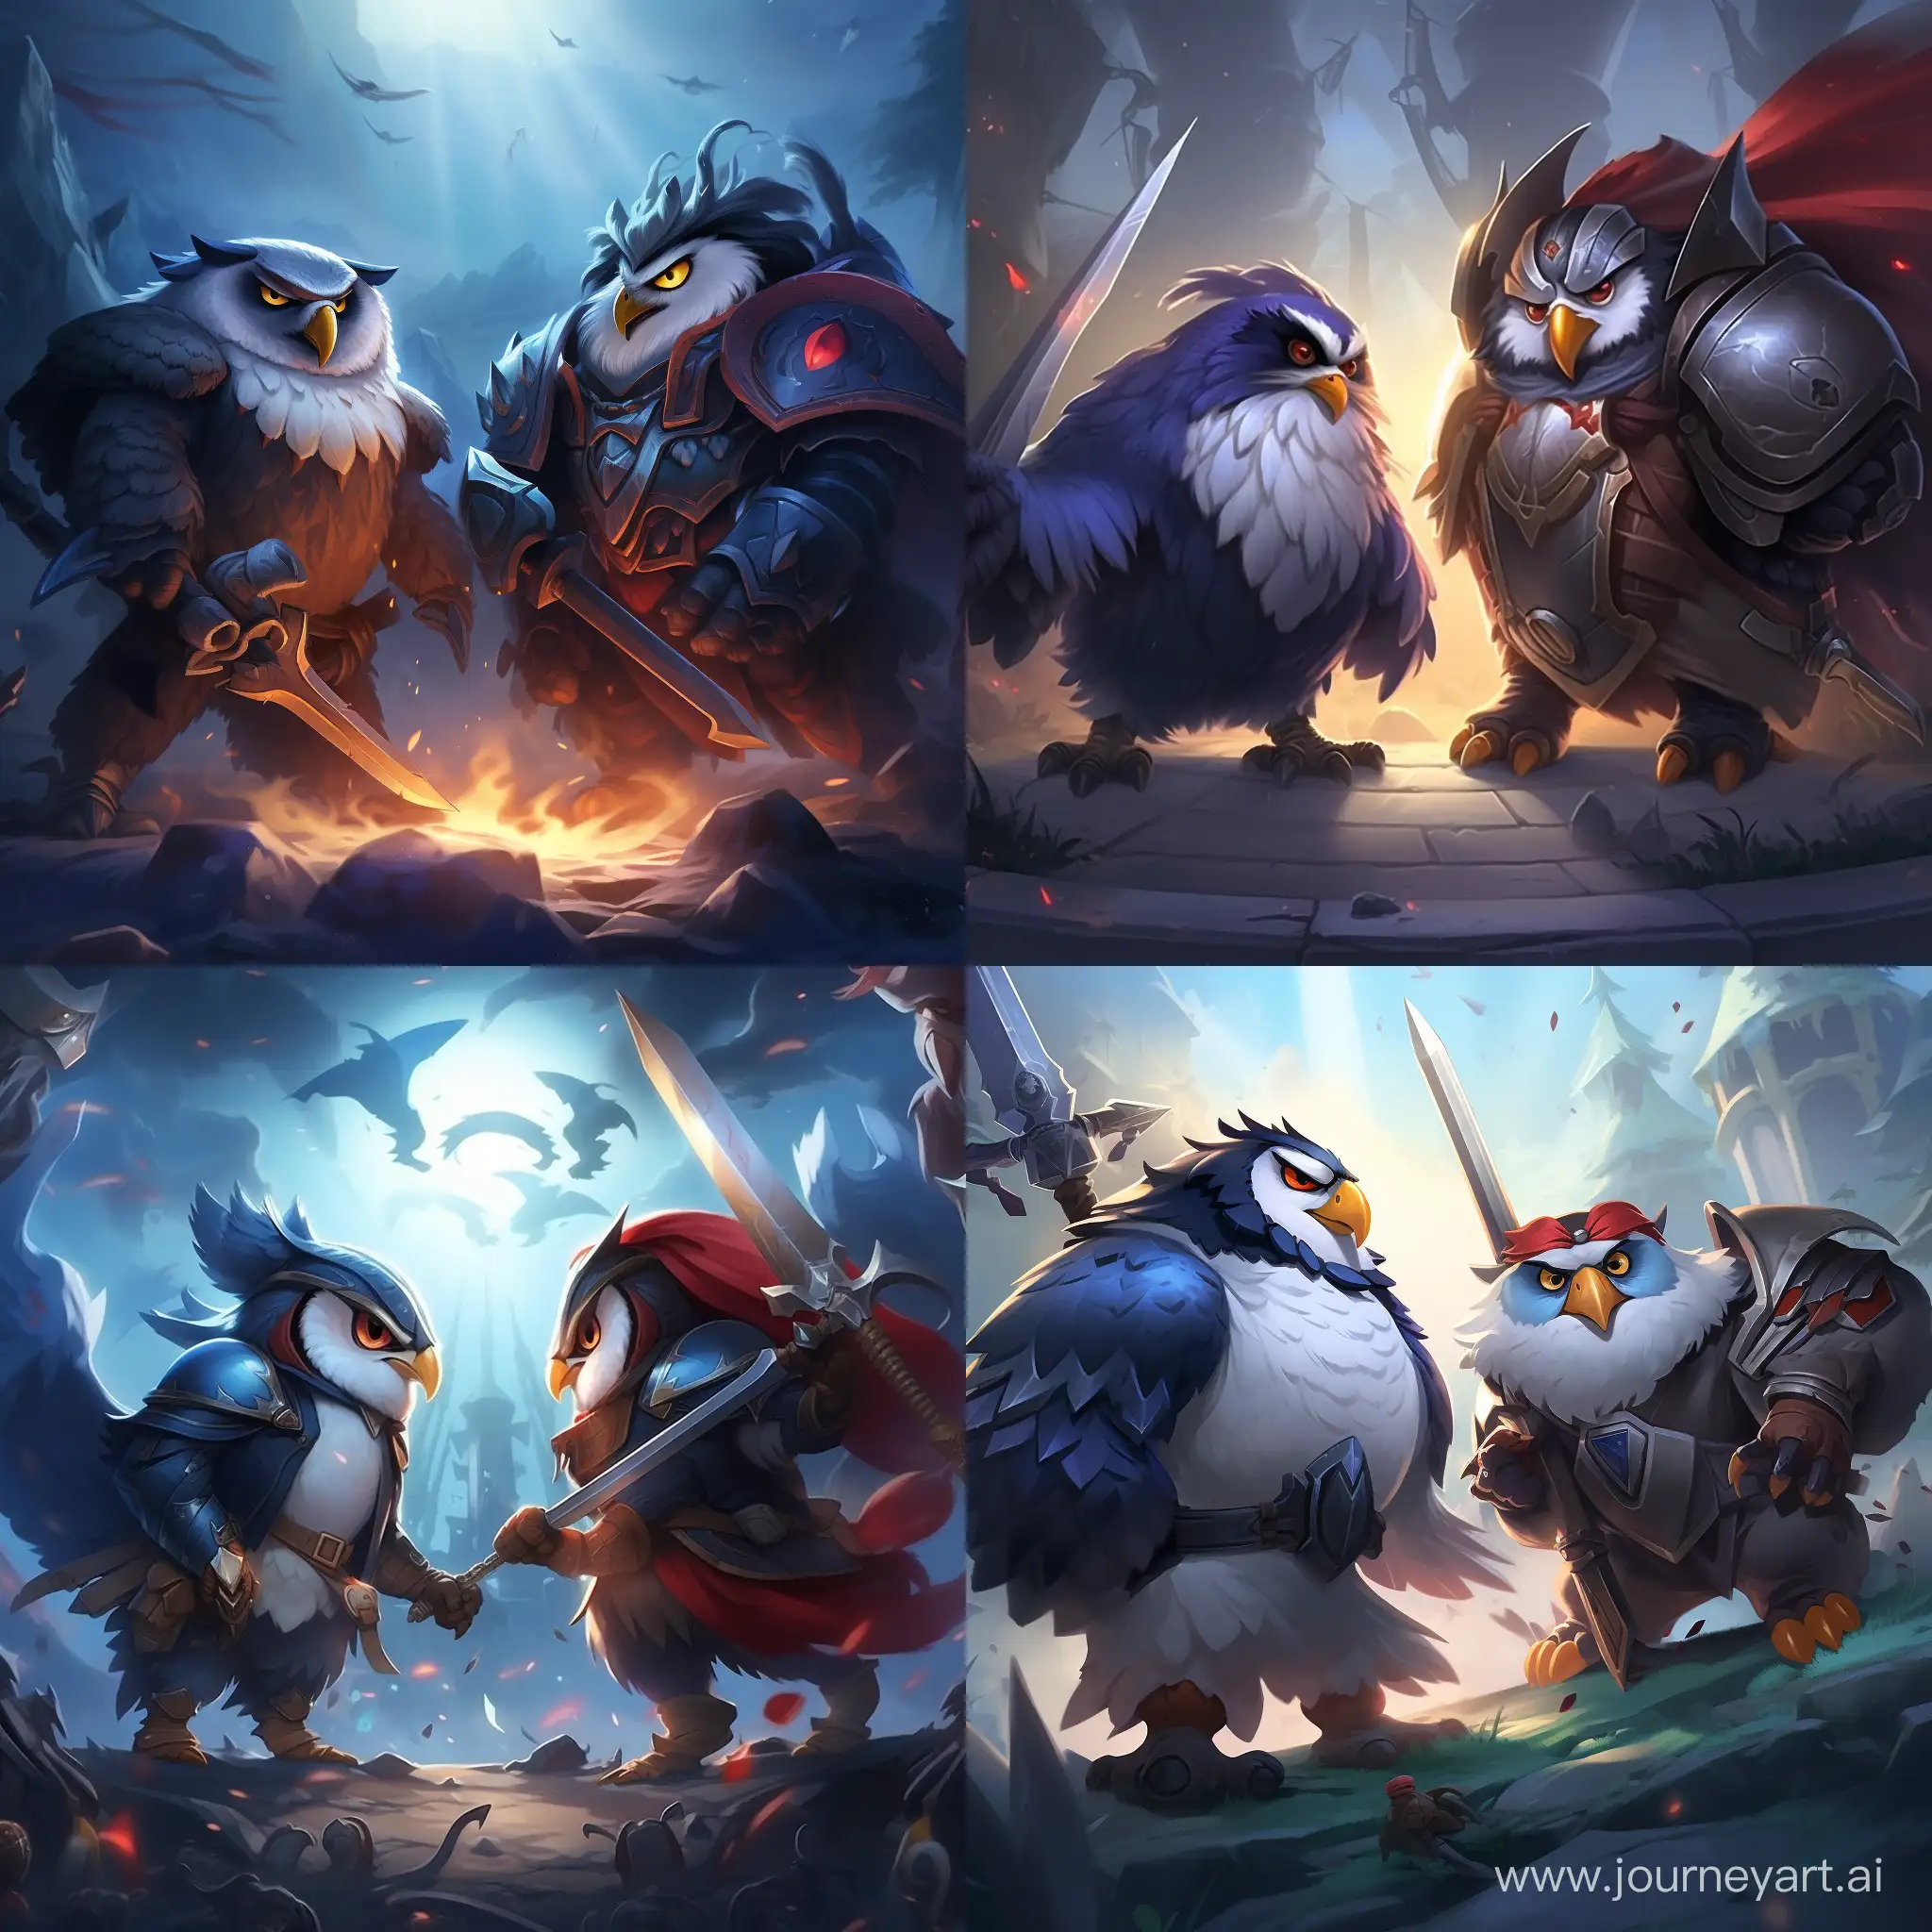 Adorable-Penguin-and-Wise-Owl-Enjoying-Teamfight-Tactics-on-PC